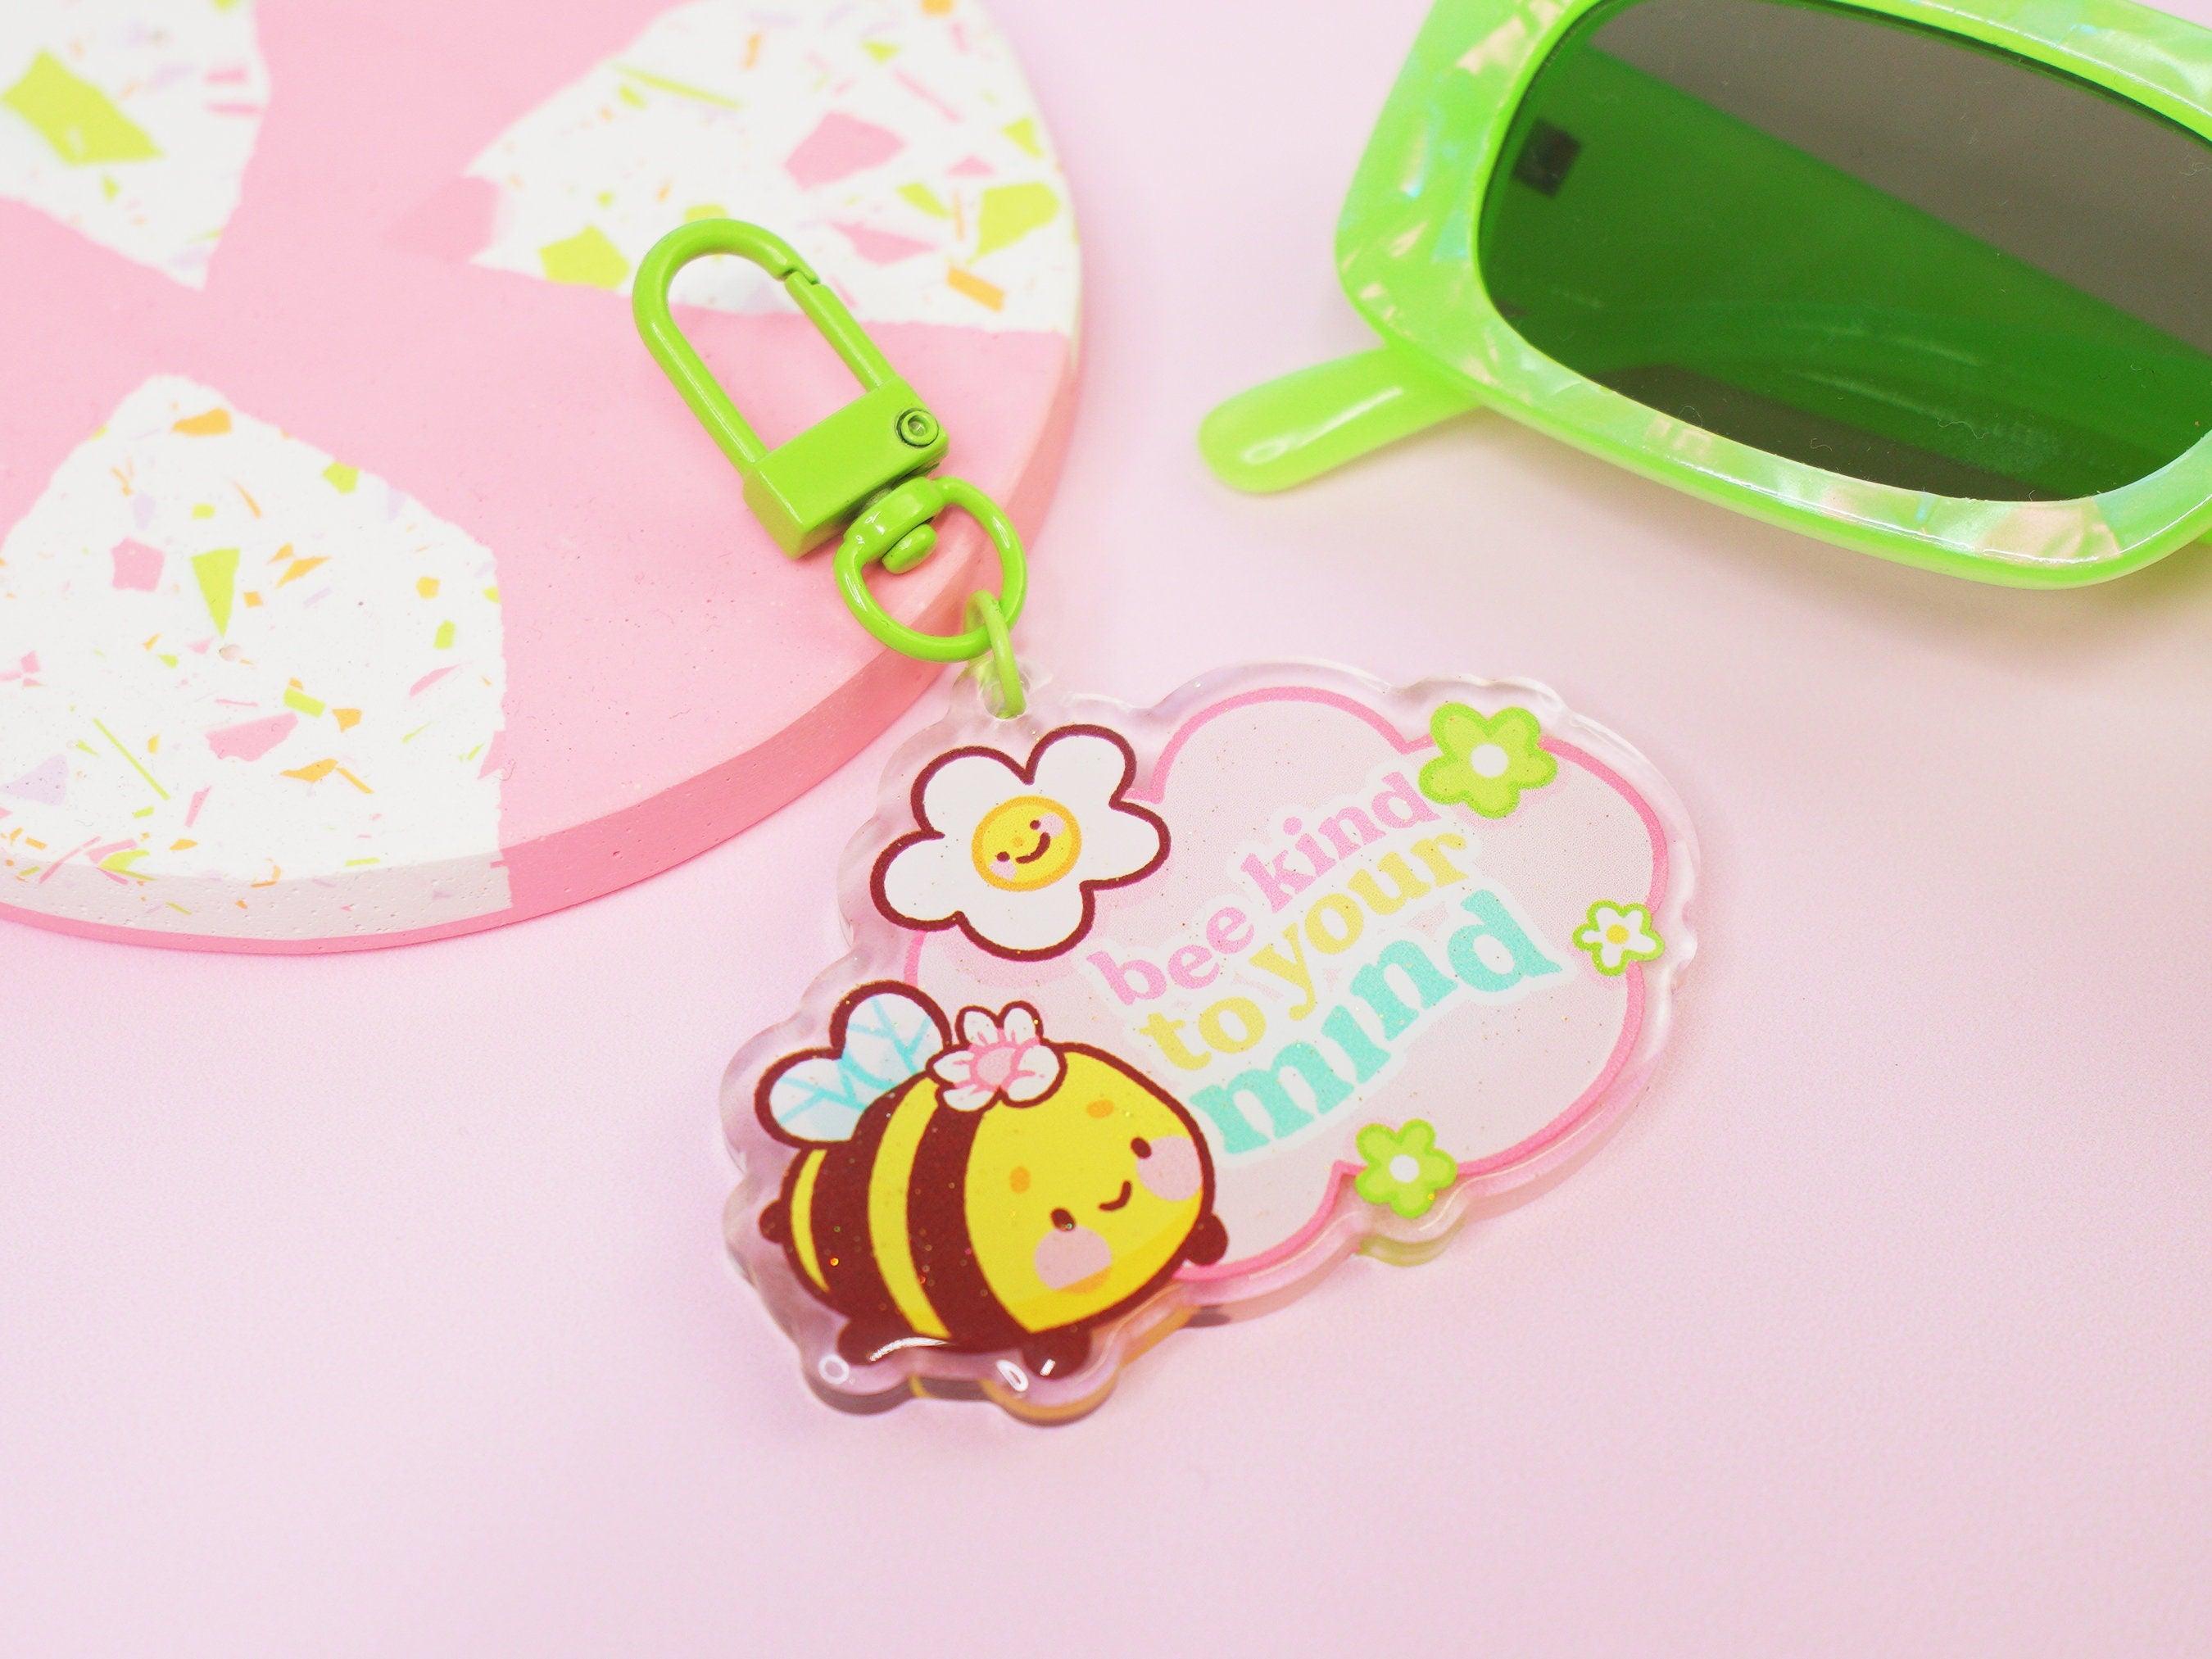 Bumblebutt Acrylic Keyring with double-sided design and glitter epoxy finish, ideal for bags or keys. 2